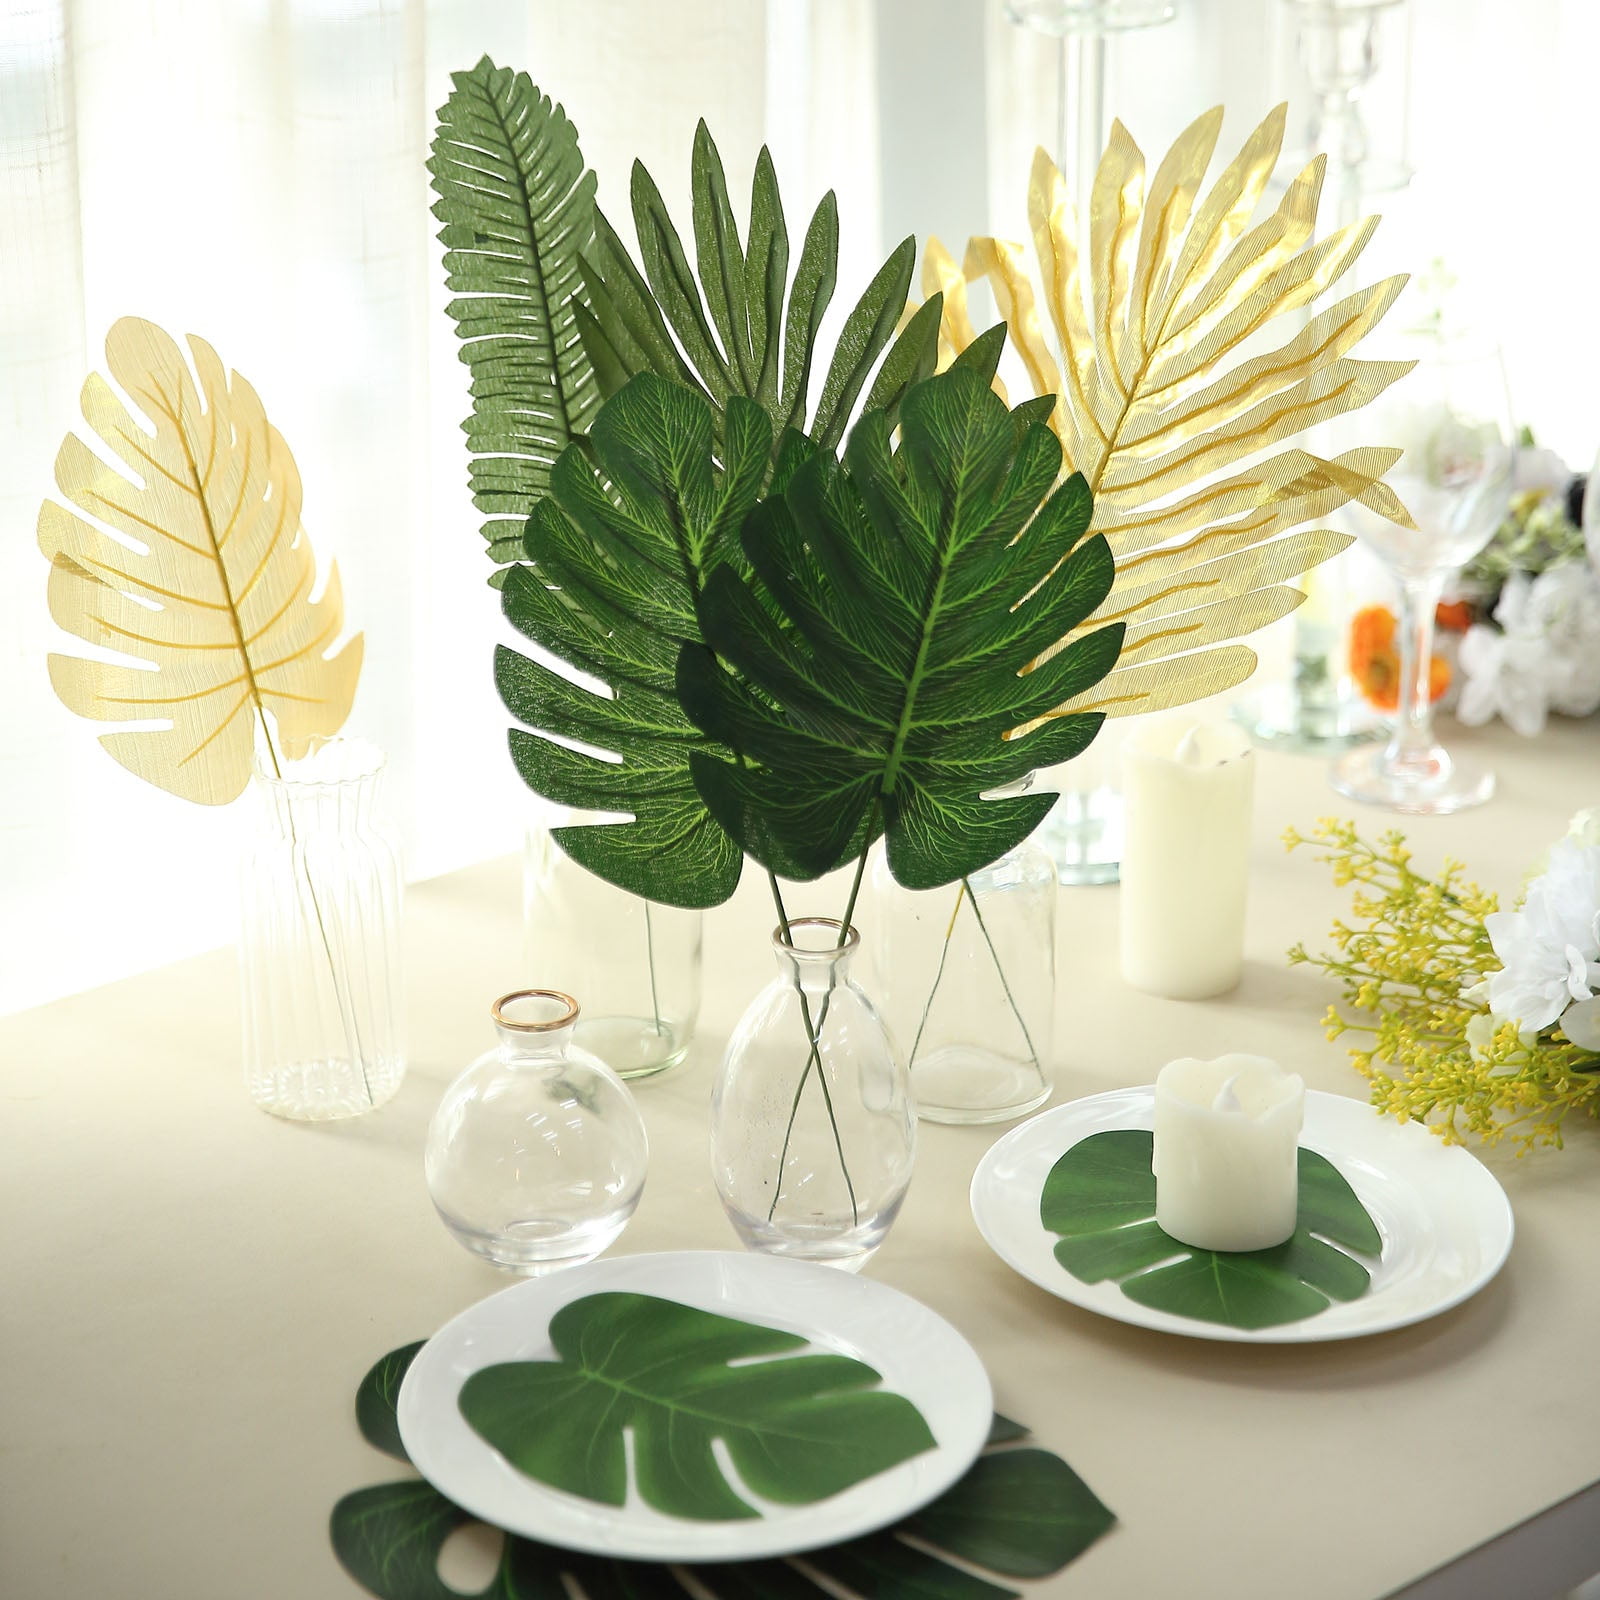 ShoppeWatch Artificial Gold Palm Leaves with Stem (30 Pcs) 3 Sizes |  Tropical Wall Decor | Philodendron Monstera Fronds | Wedding Party  Decorations 